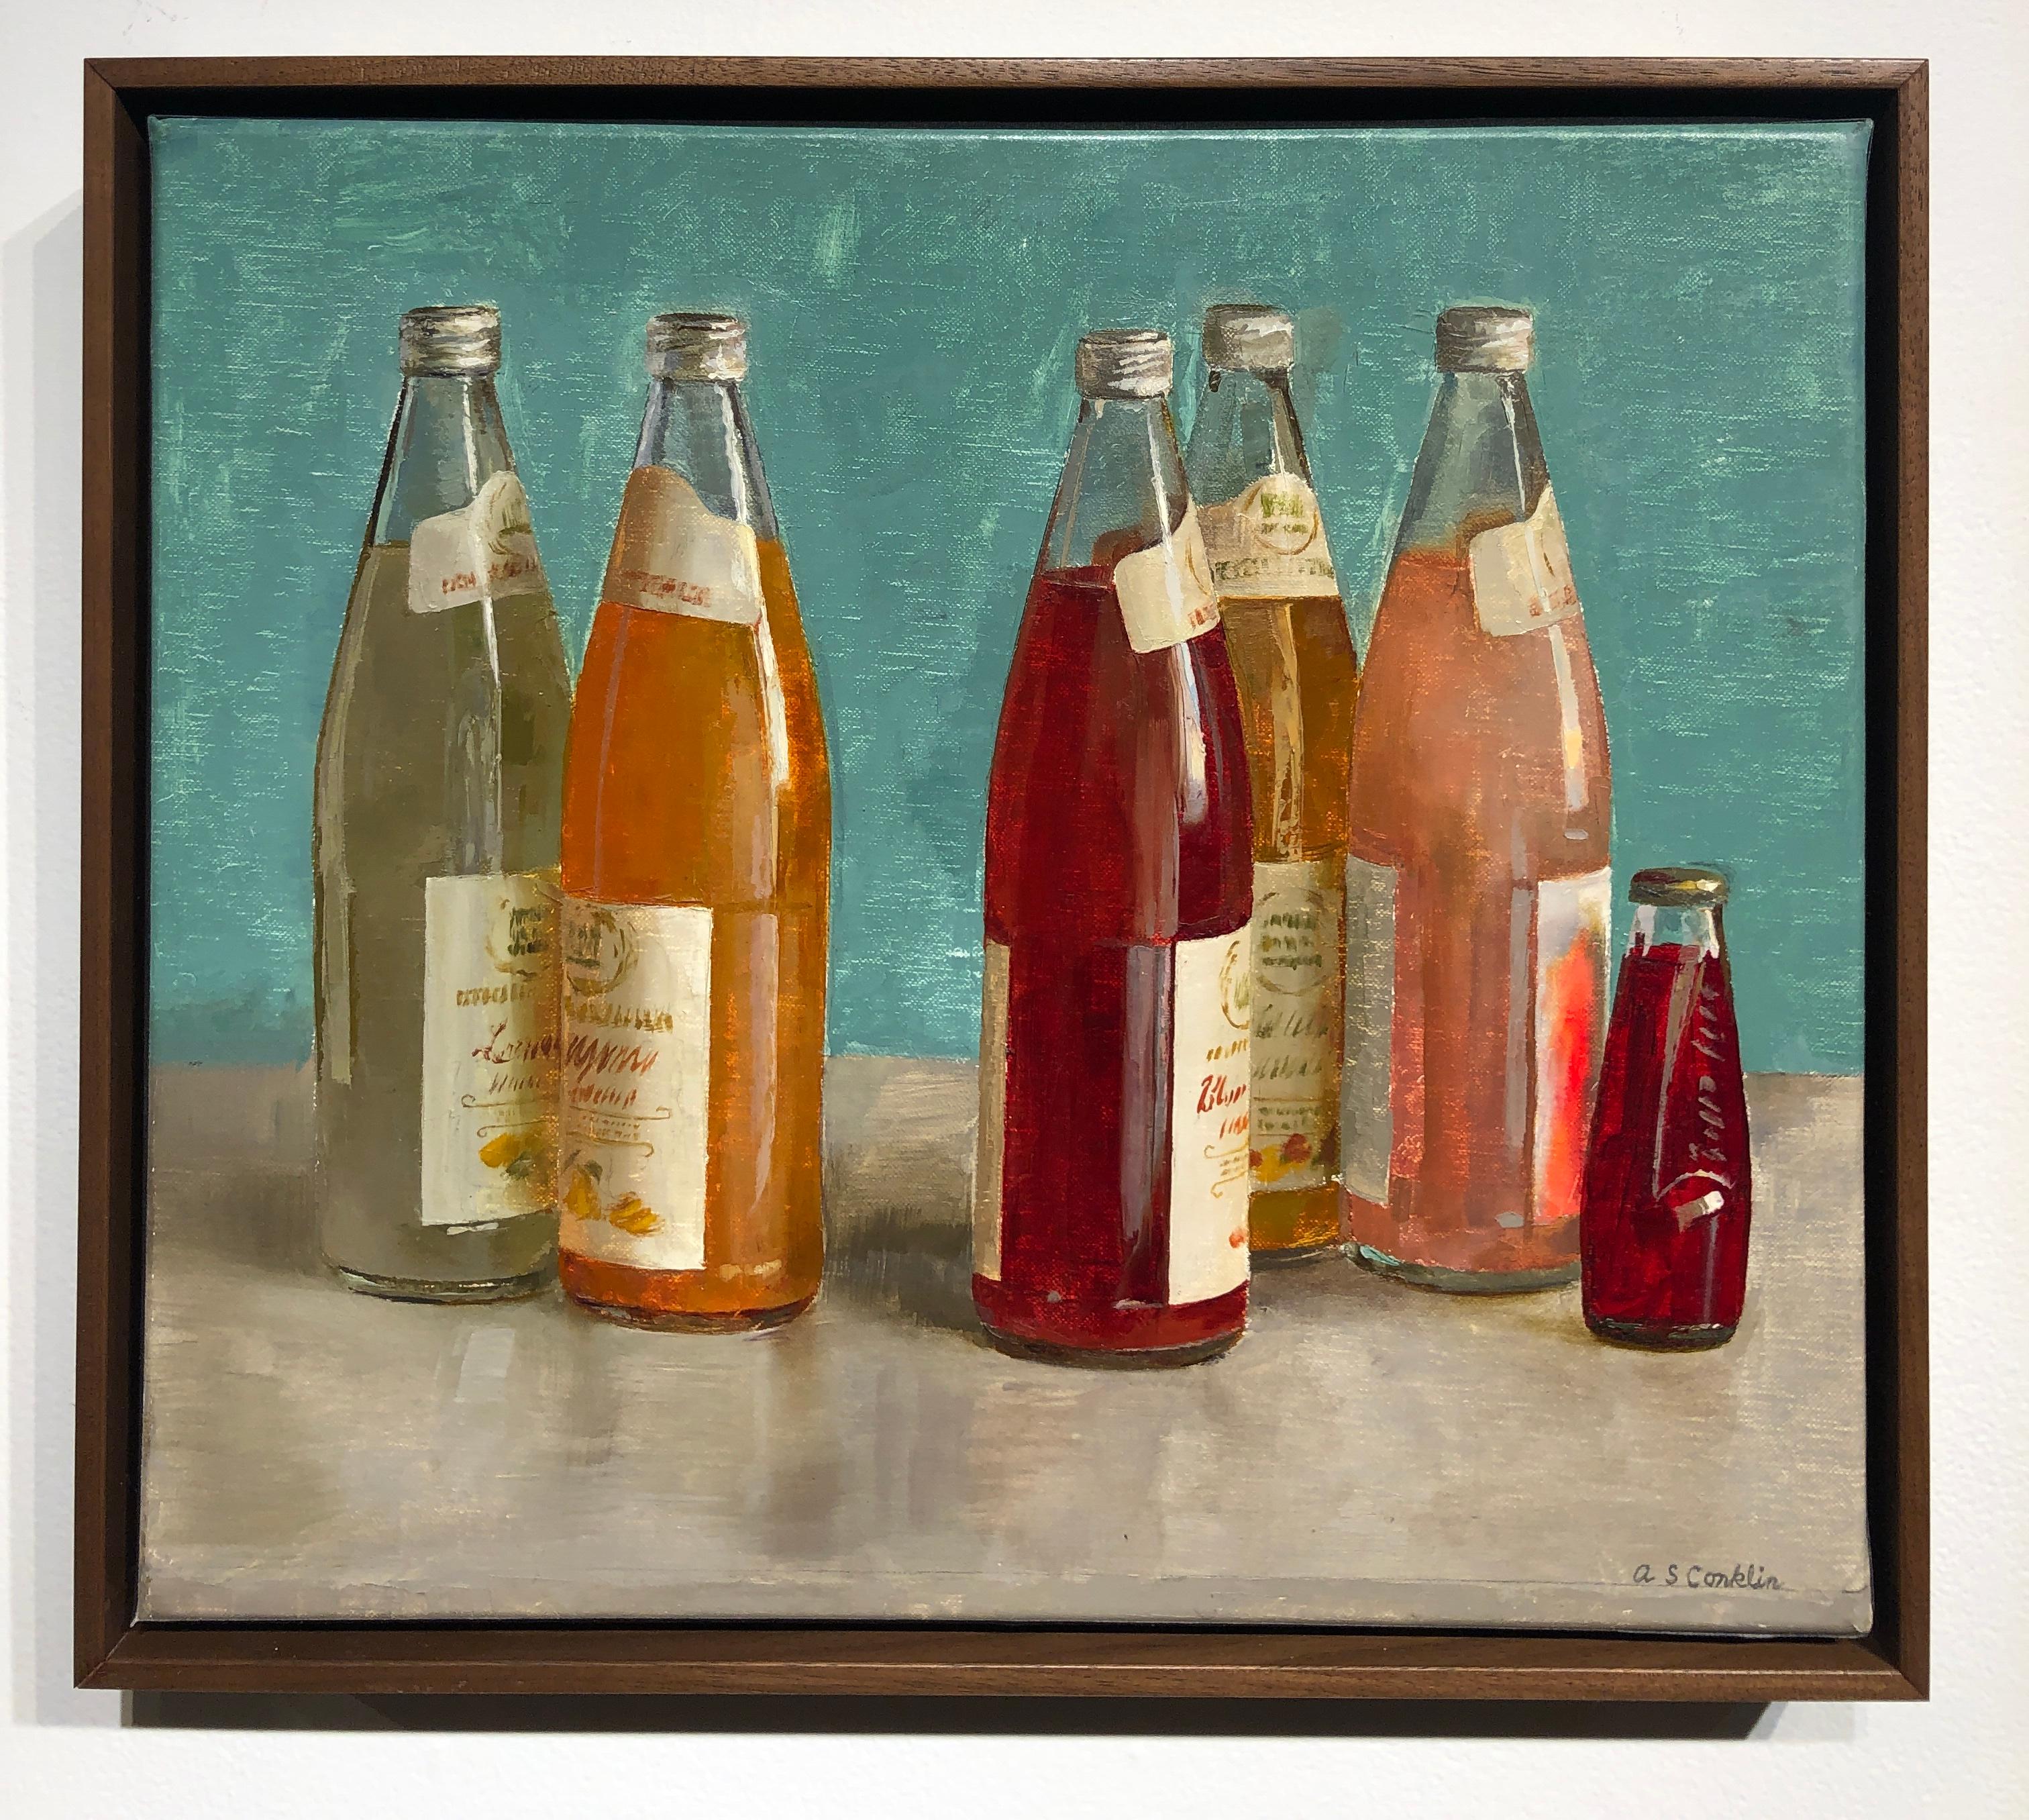 Still Life painting, with origins dating back to the 16th Century, often depicts simple everyday objects. Conklin uses richly colored Italian Soda bottles to play with placement and composition. Set on a gray table, the rich reds and corals of the